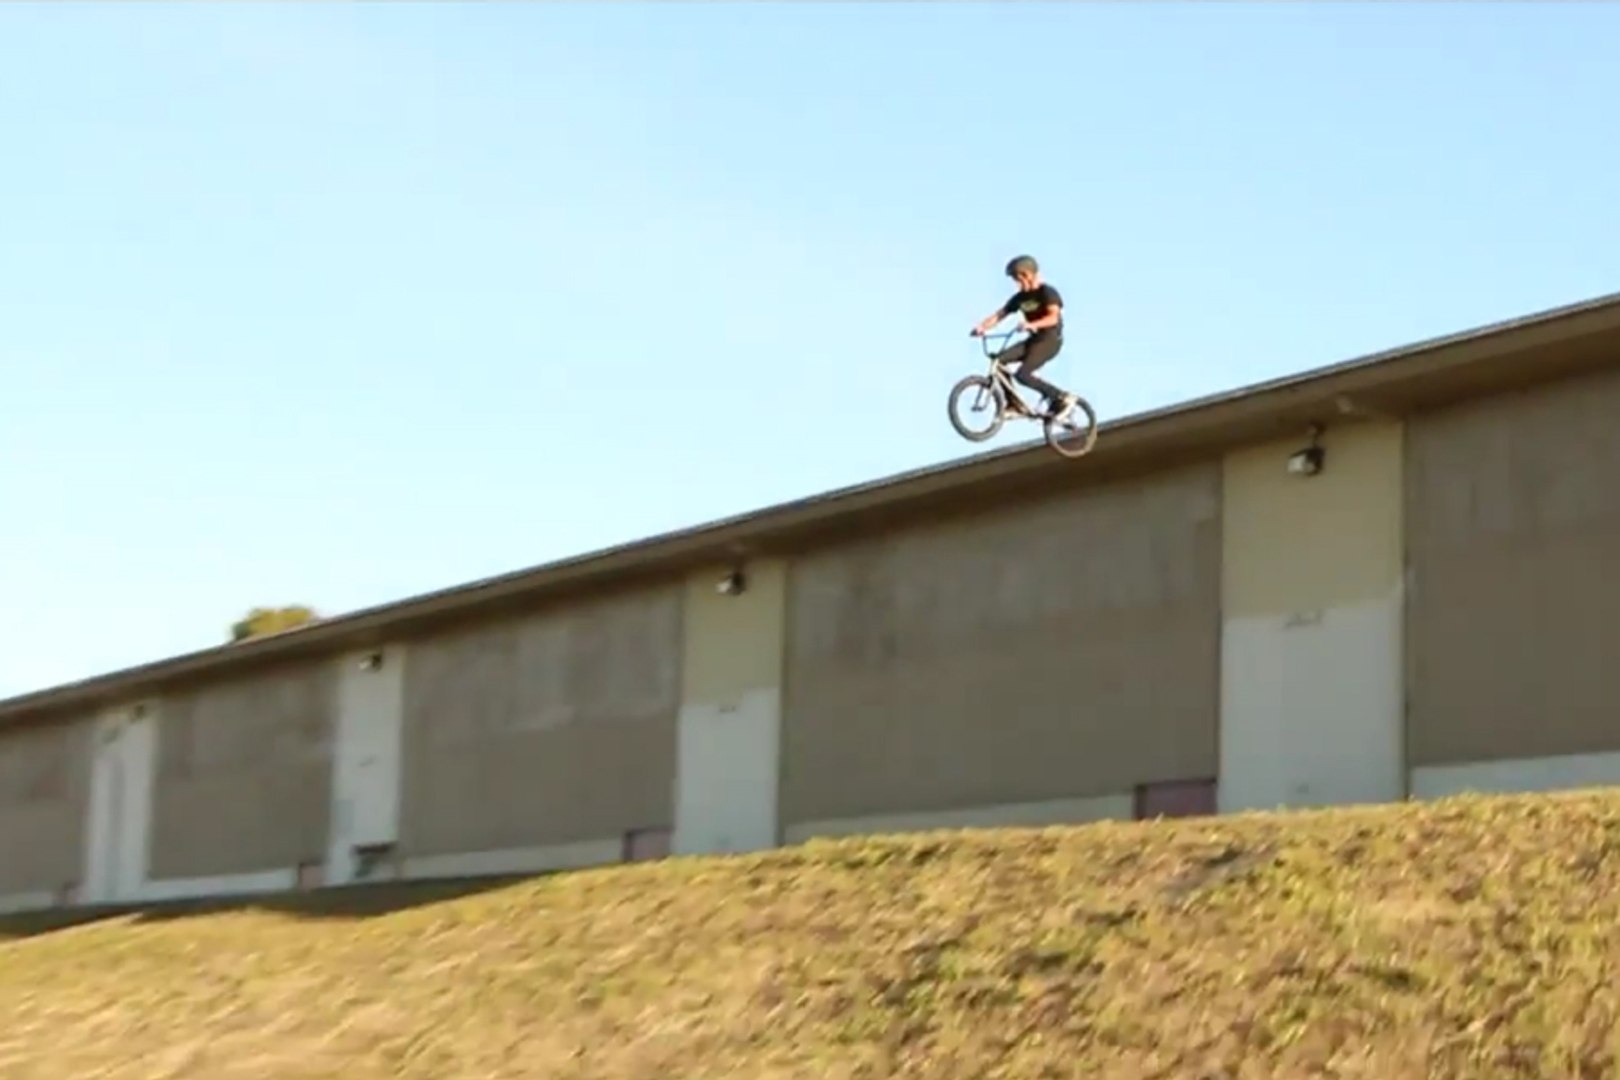 A 15 YEAR OLD PAUL SHARIFF IS CRAZY - BMX - Vidéo Dailymotion